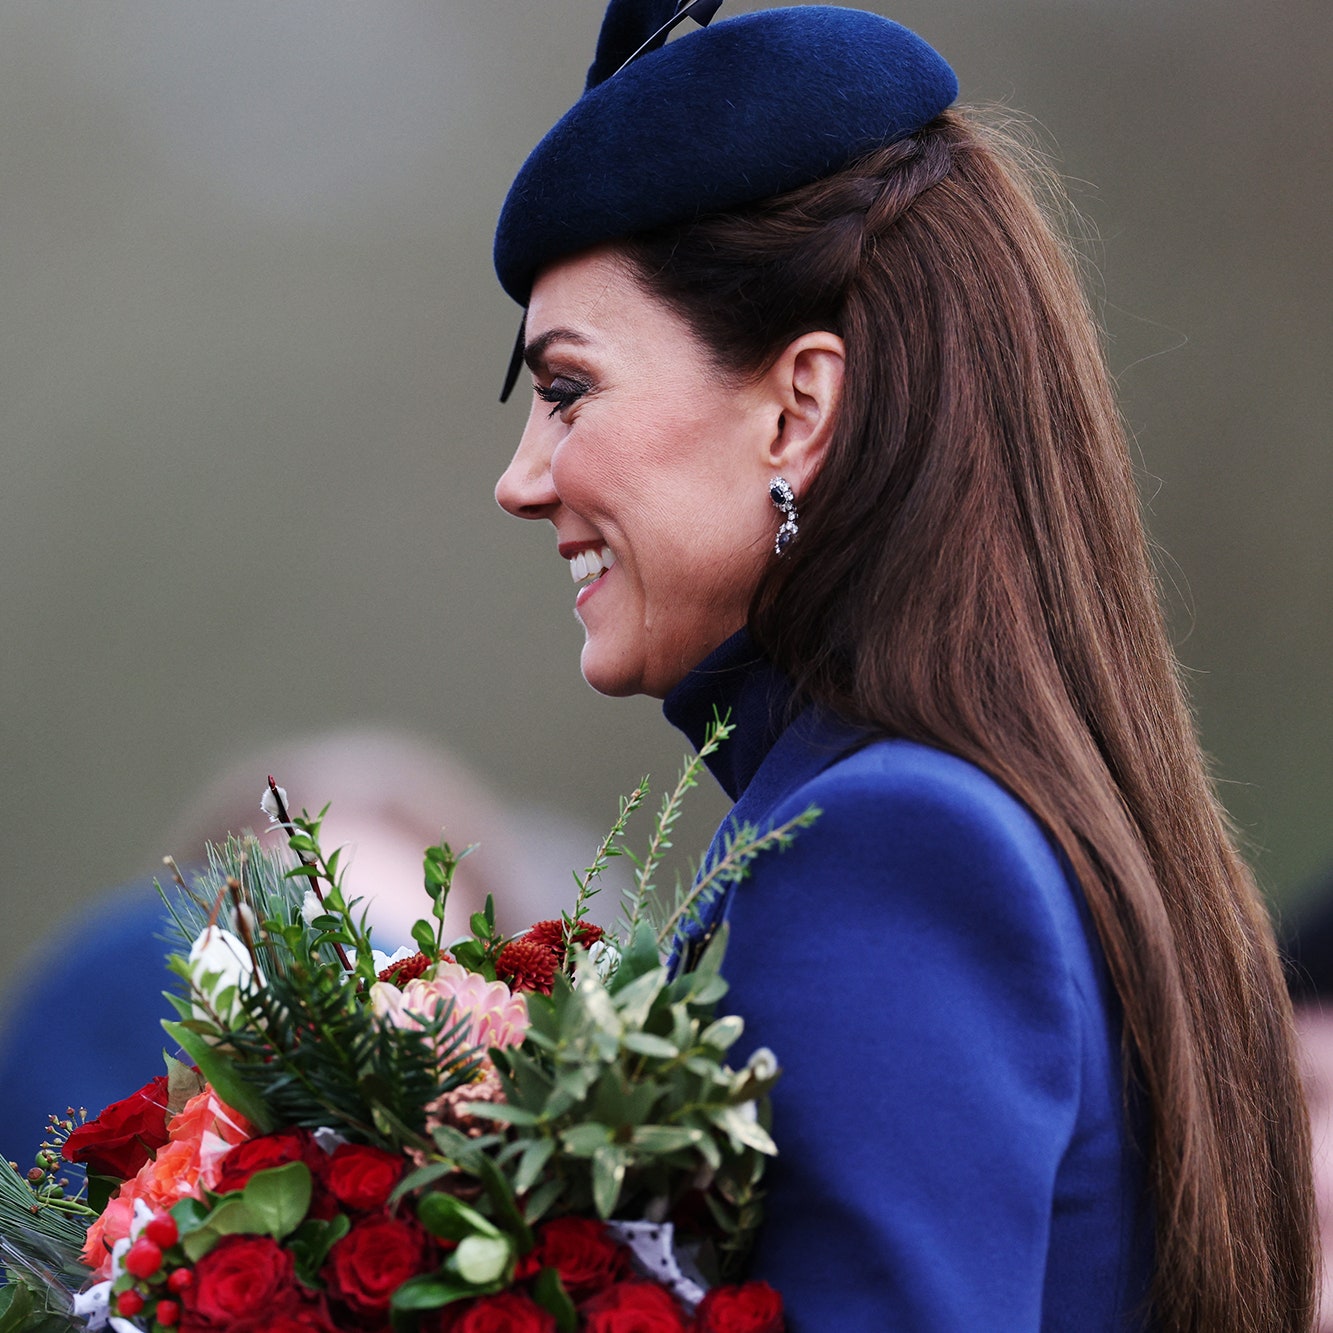 Kate Middleton Will Get Back to All the Well-Wishers Who Wrote to Her&-Eventually